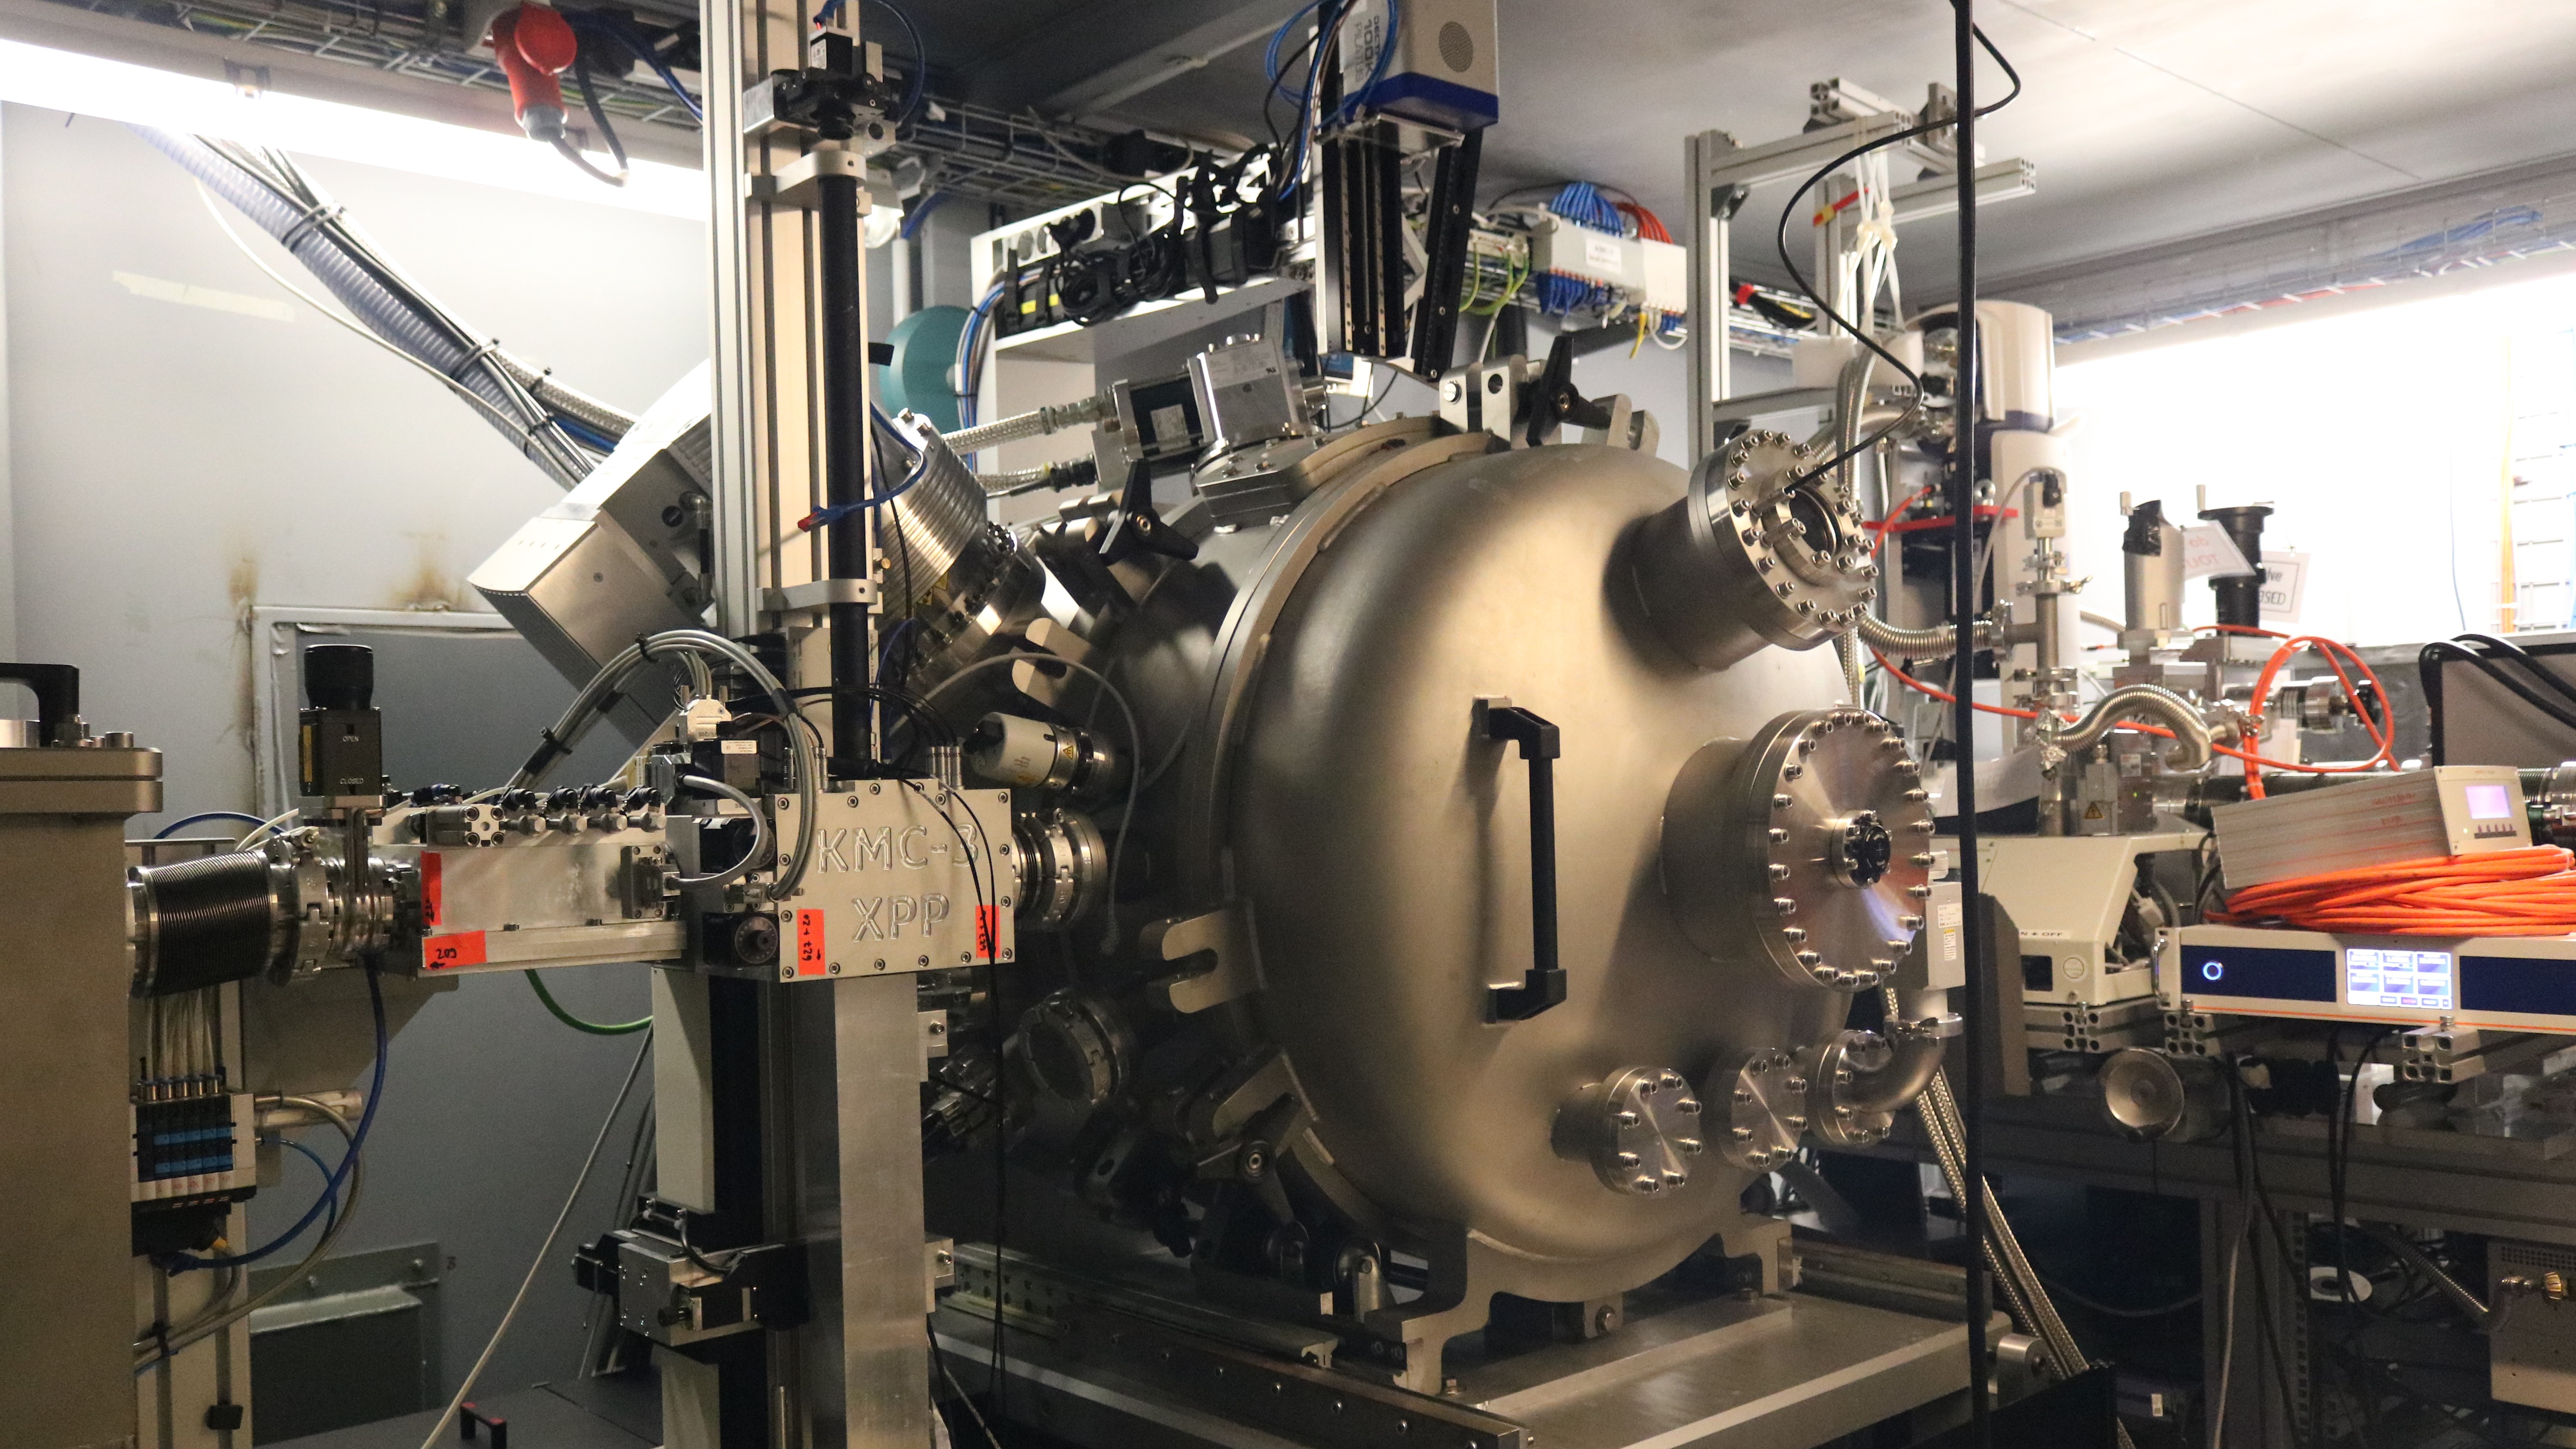 The X-ray Pump Probe (XPP) station at the KMC-3 beamline.